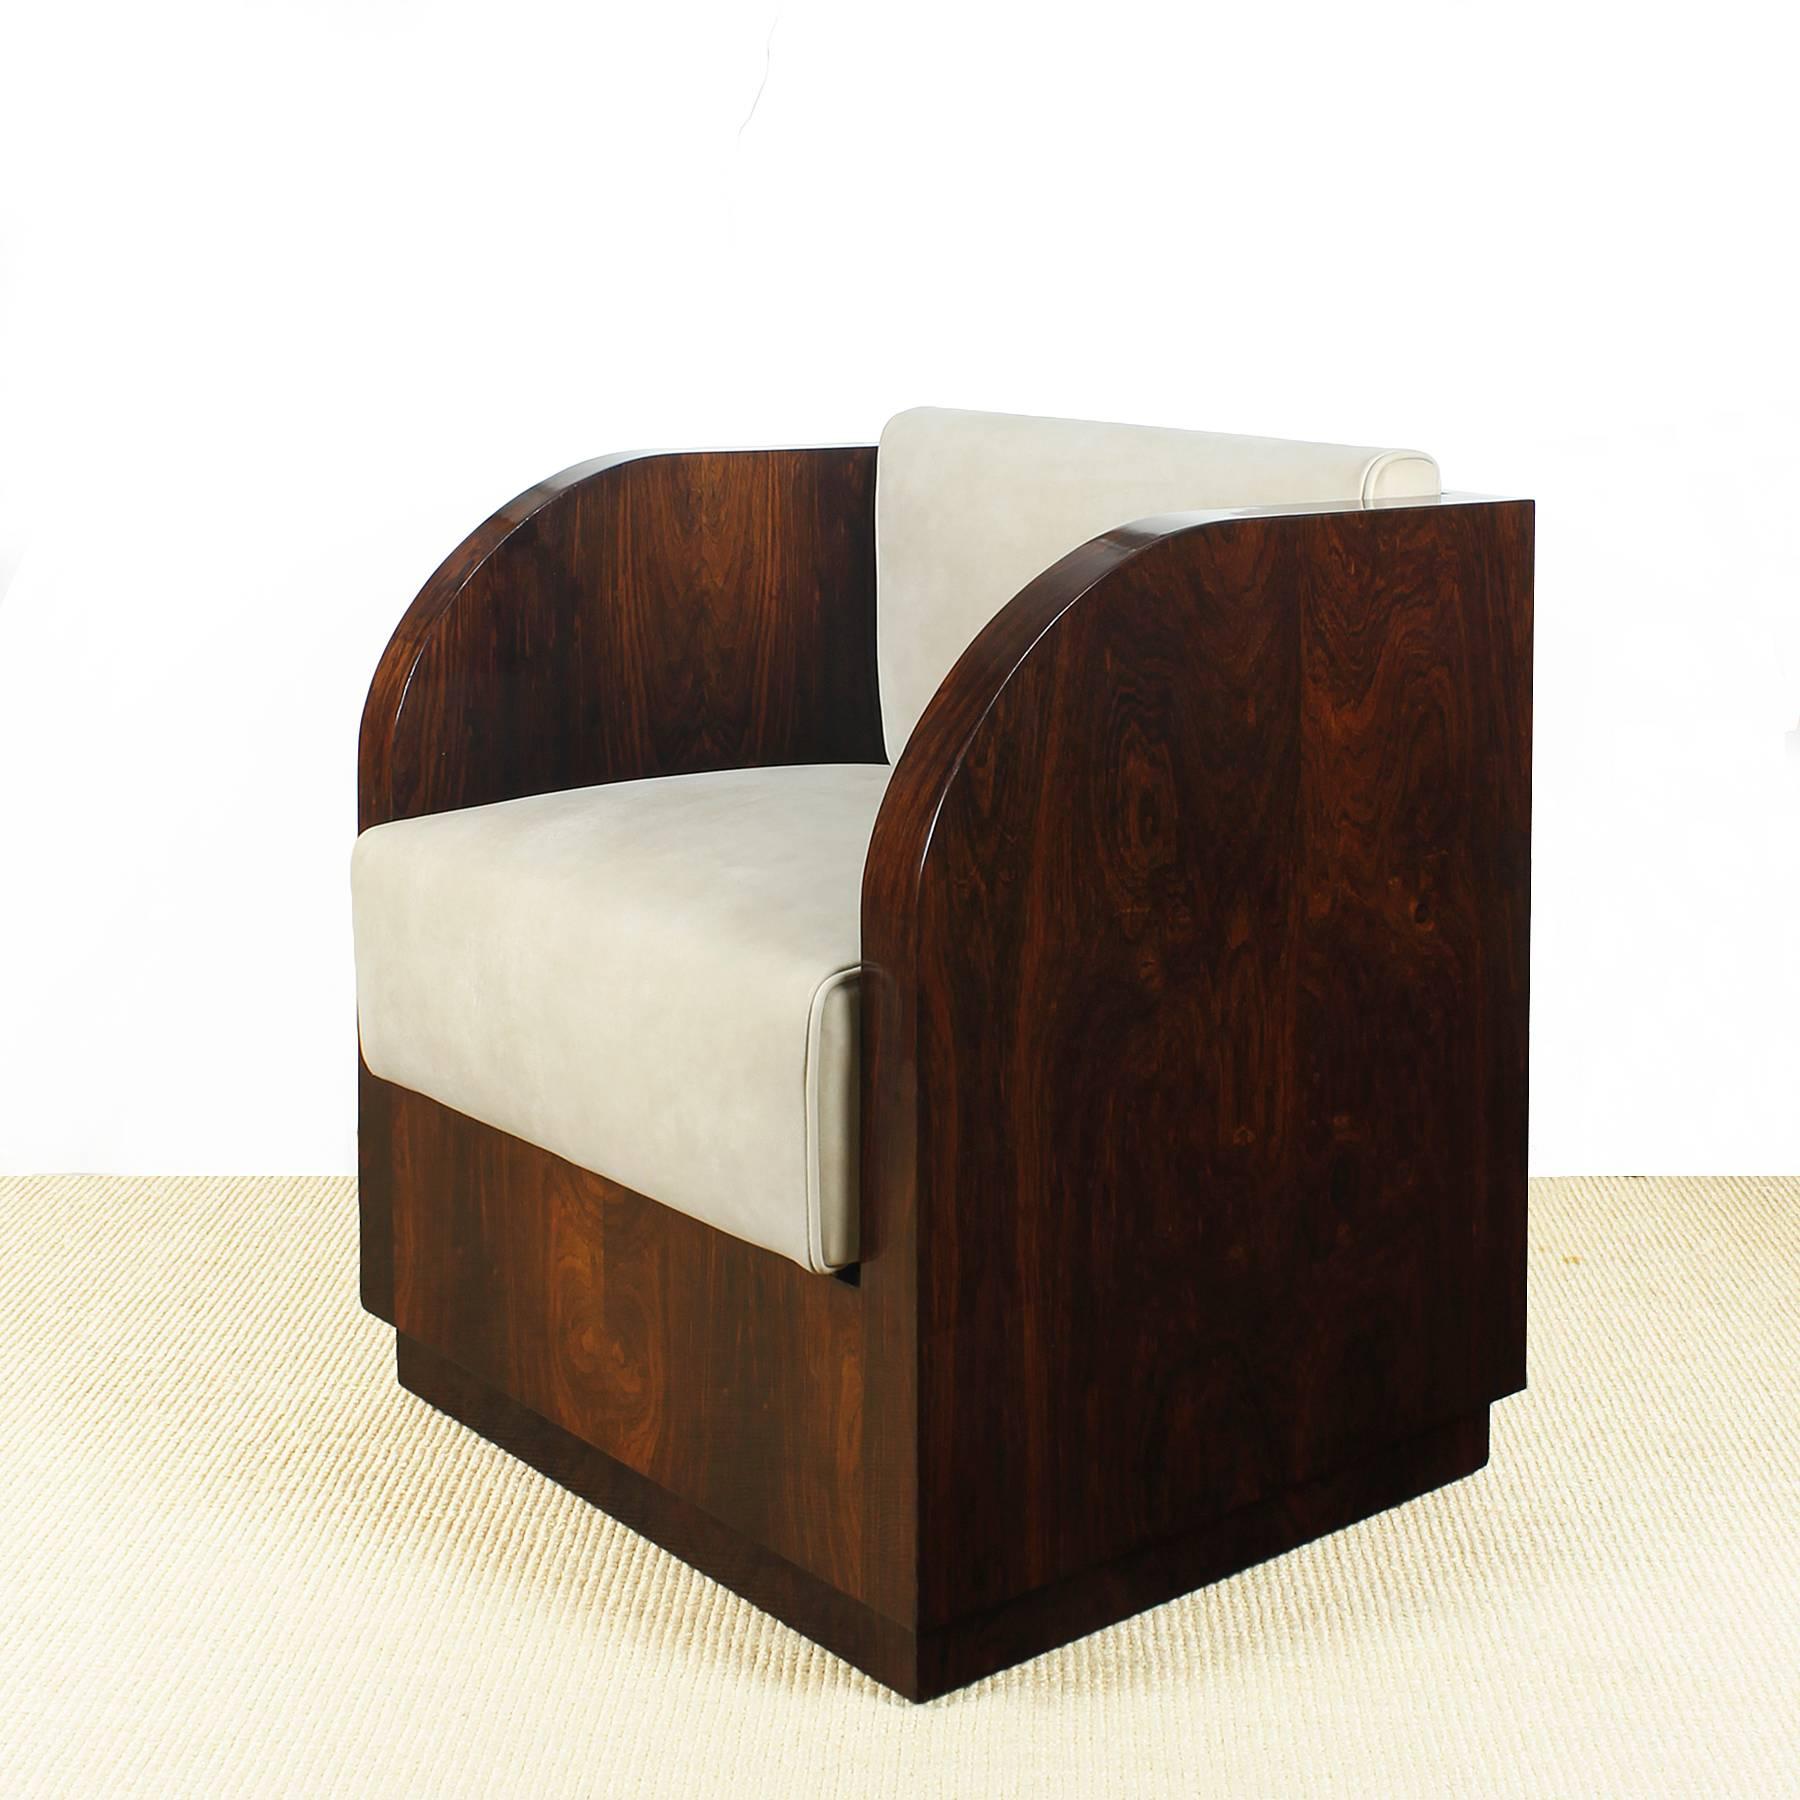 1930´s Set of Art Deco Cubists Desk and Armchair, rosewood, leather - France 1